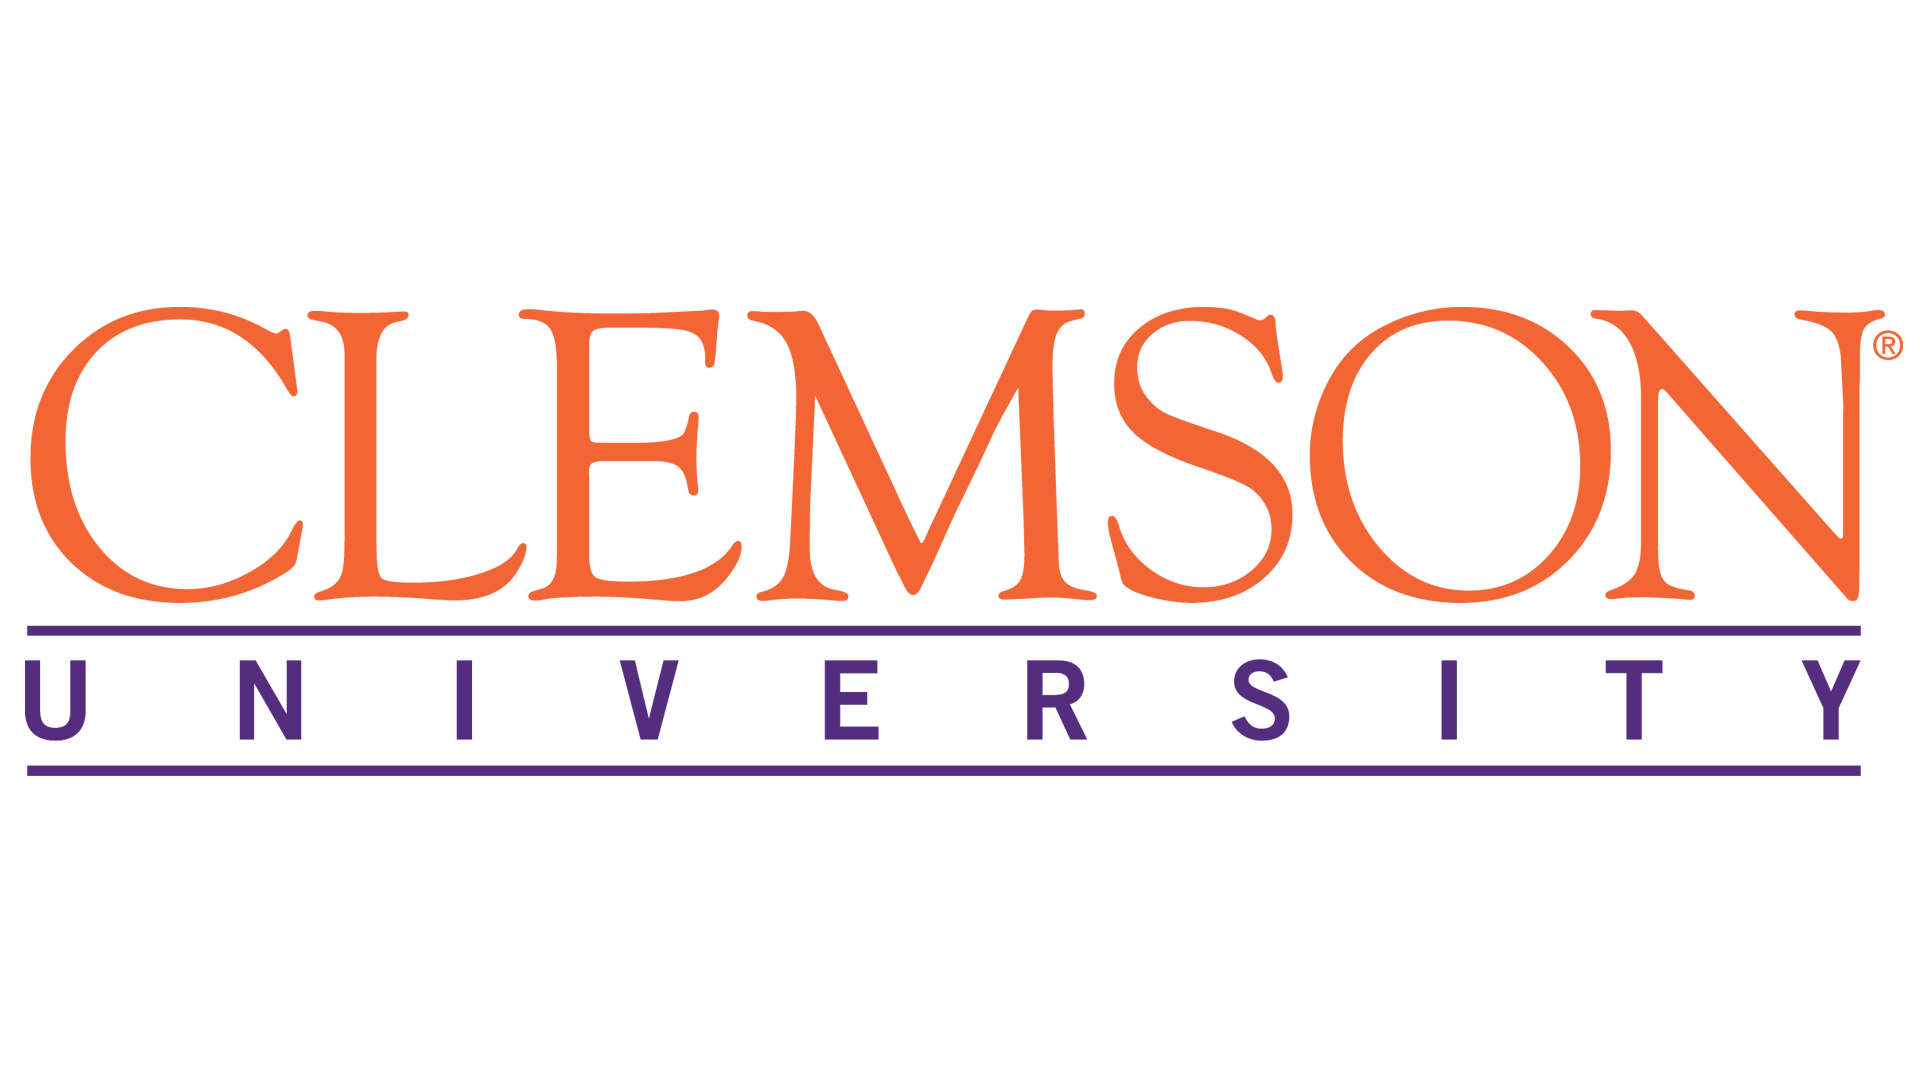 Clemson Logo - Clemson University Logo, Clemson University Symbol, Meaning, History ...